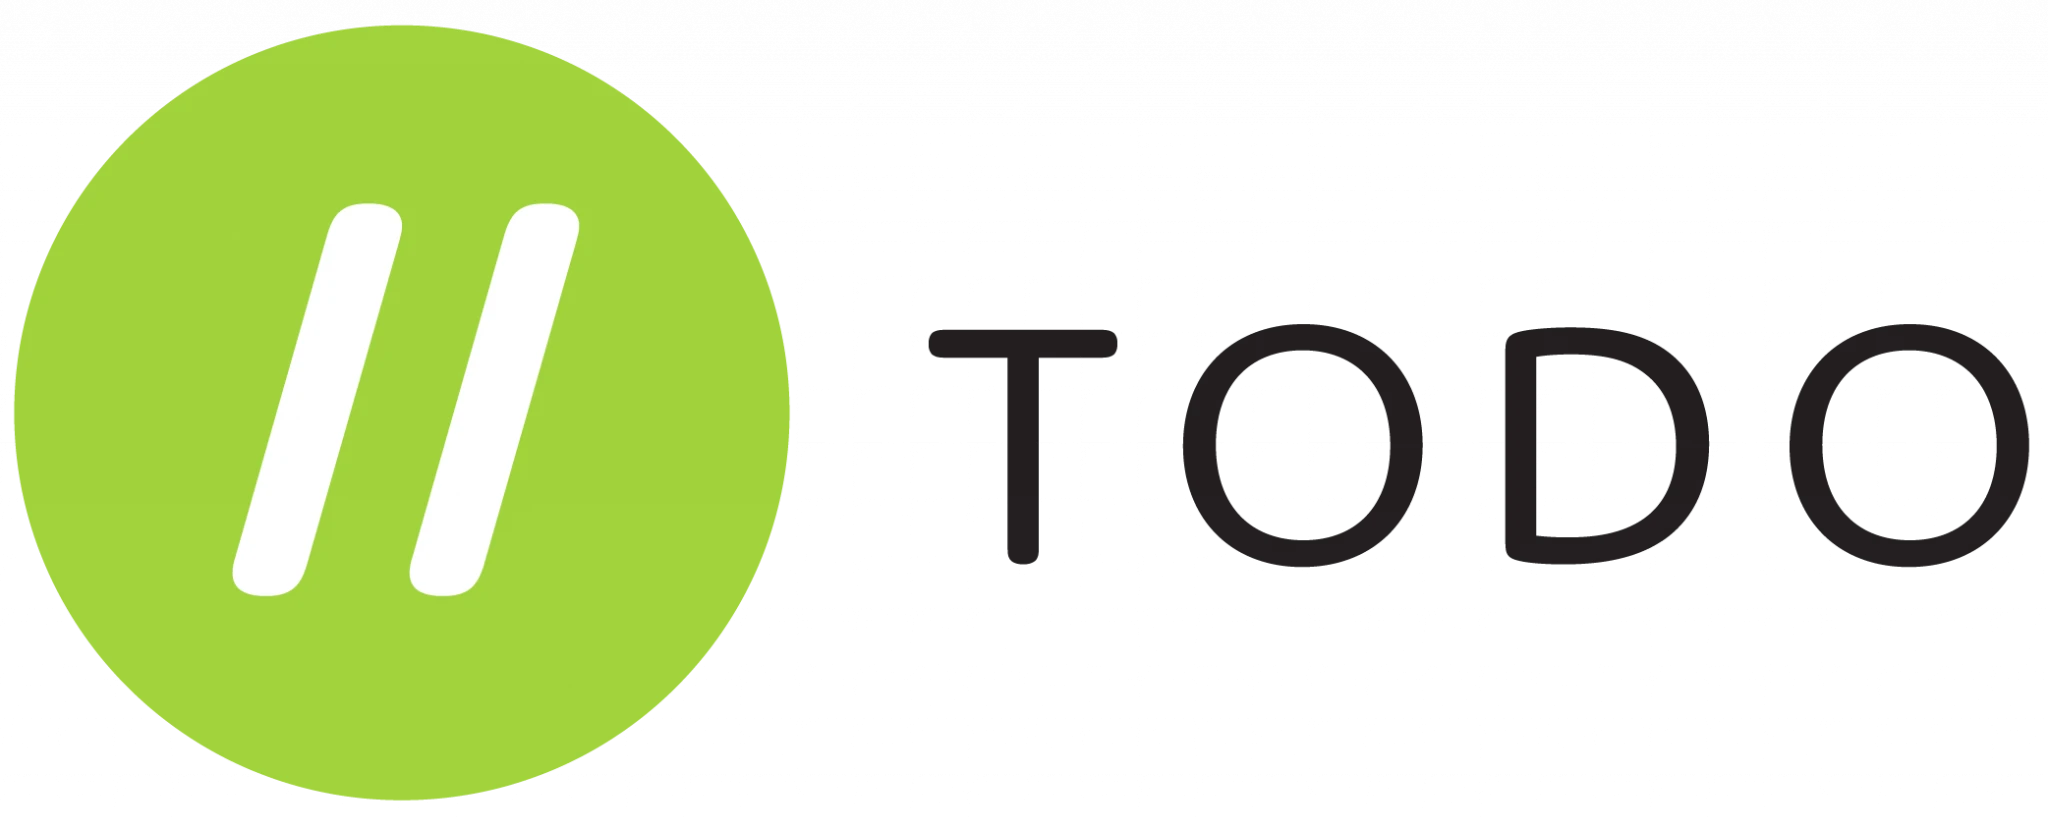 The TODO logo is a green circle with two white forward slashes inside. To the right is thin all-caps text reading "TODO".